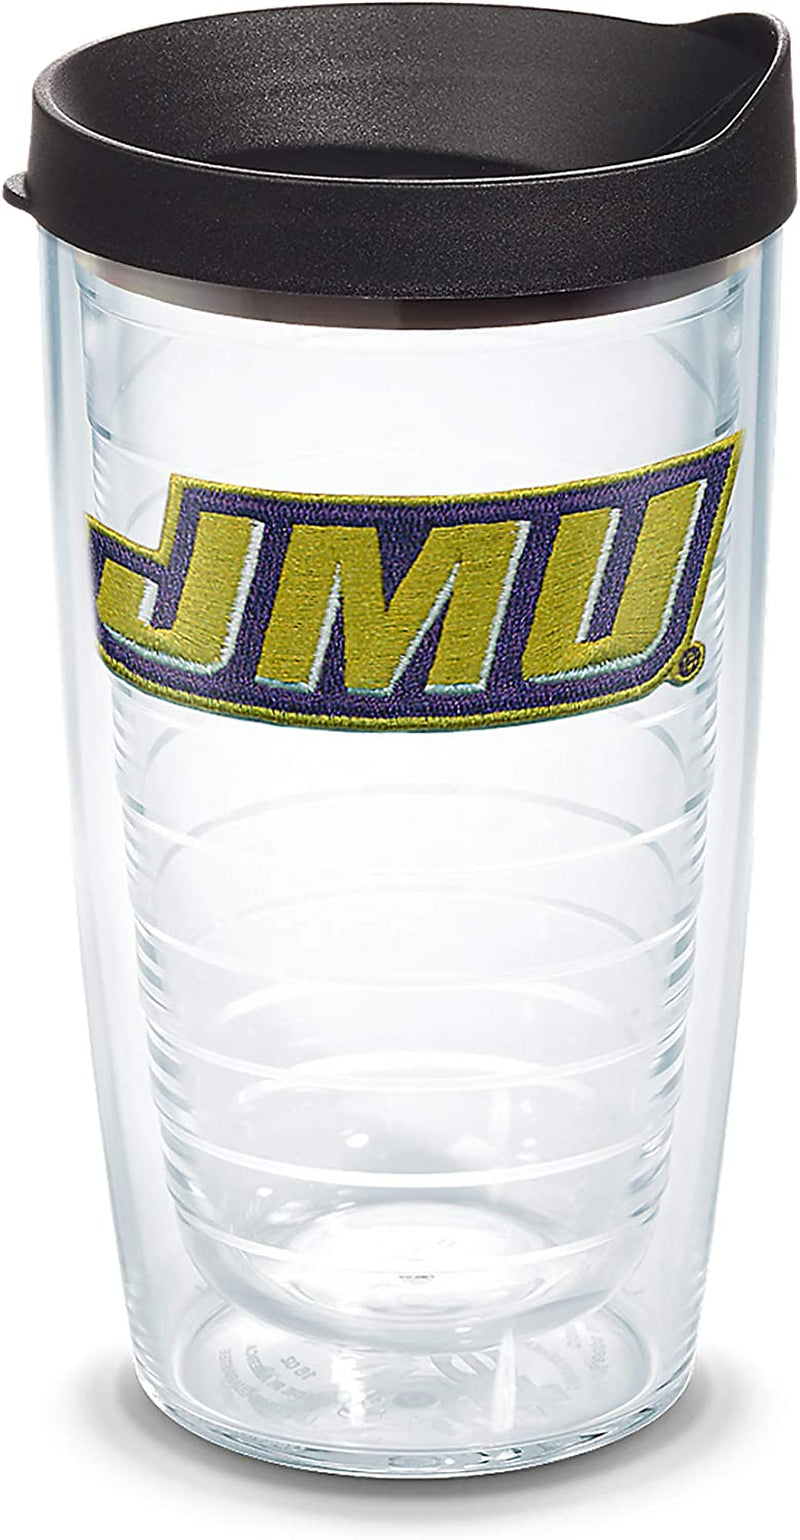 Tervis Made in USA Double Walled James Madison University JMU Dukes Insulated Tumbler Cup Keeps Drinks Cold & Hot, 24Oz - Black Lid, Primary Logo Home & Garden > Kitchen & Dining > Tableware > Drinkware Tervis Primary Logo 16oz - Black Lid 